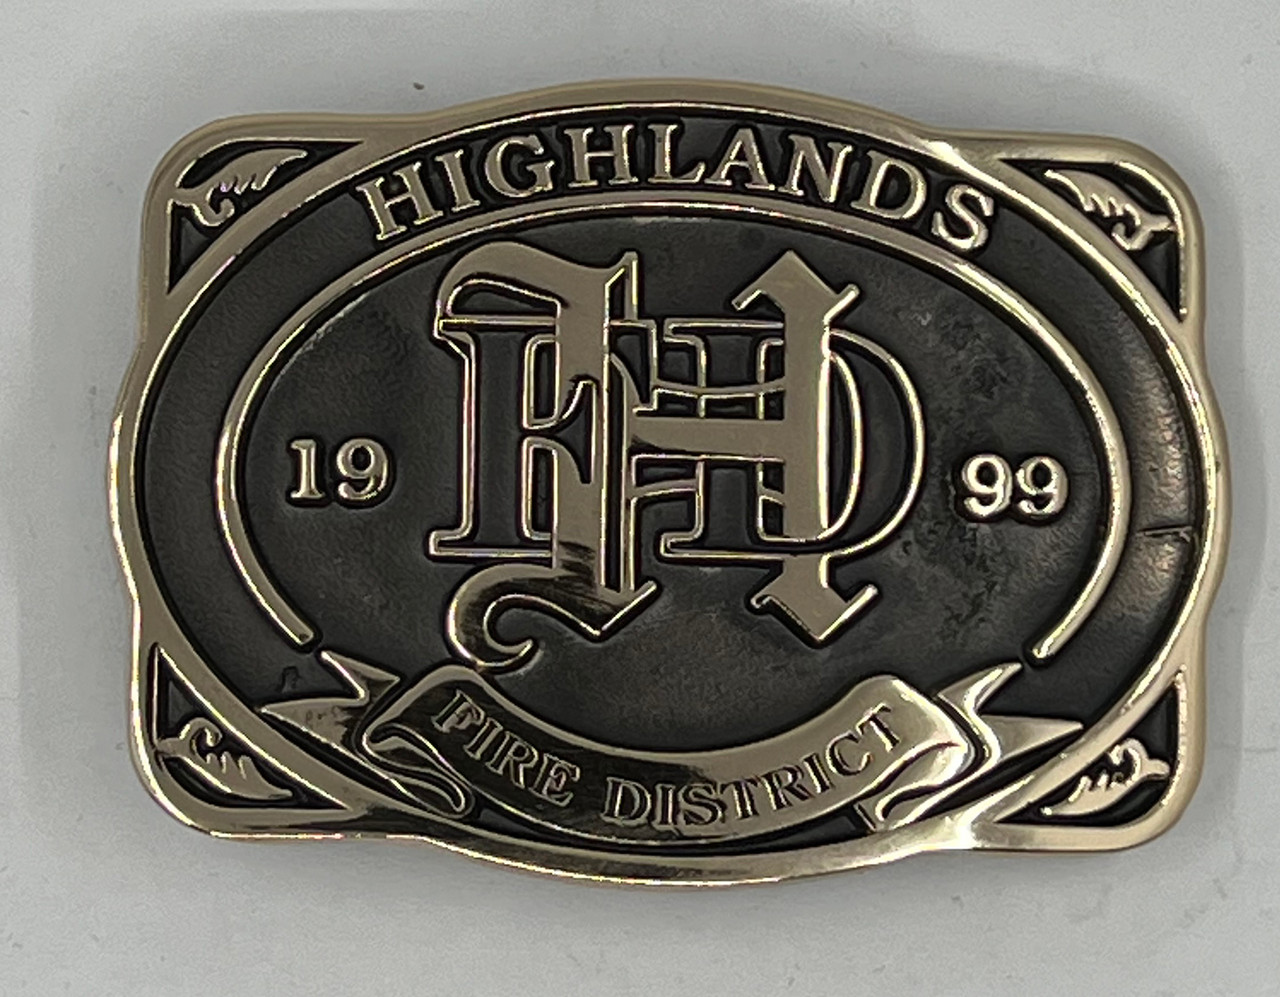 Highlands Fire District Buckle (RESTRICTED)